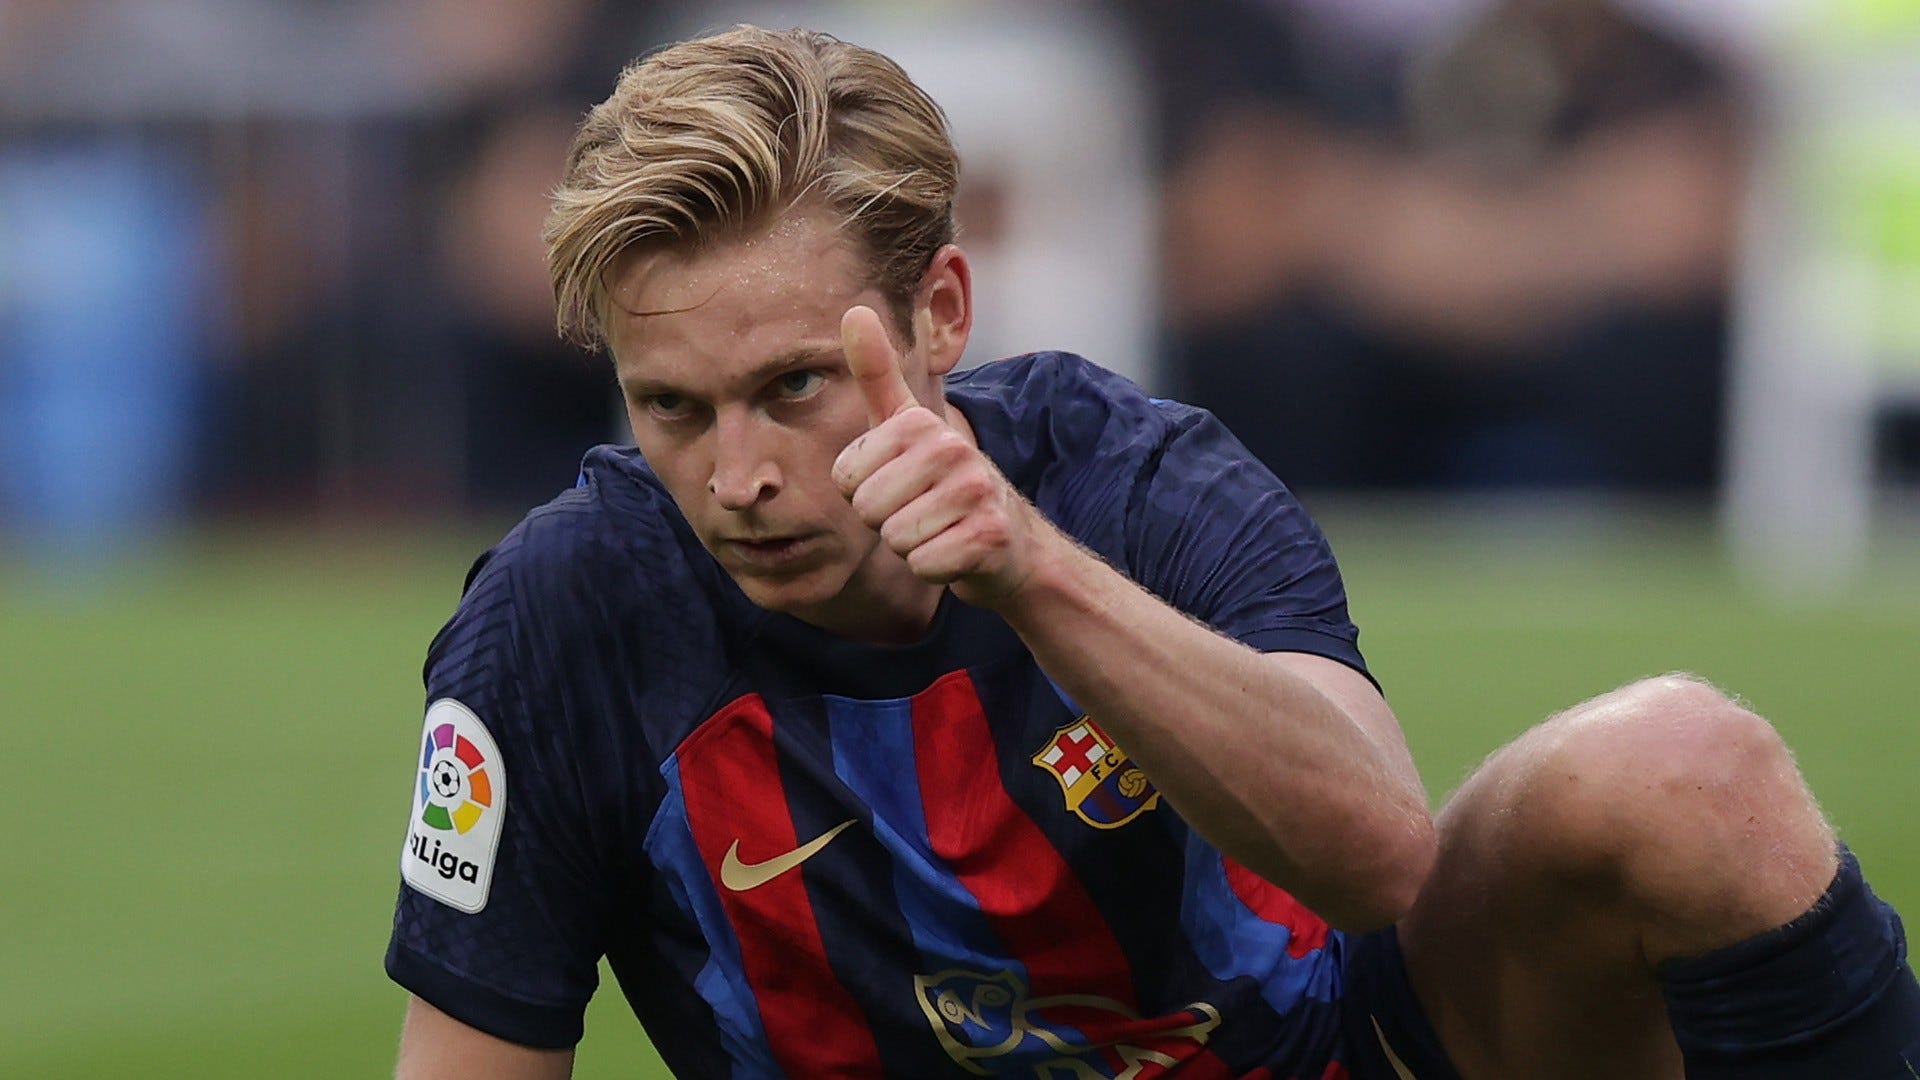 Frenkie de Jong distances himself from Man Utd transfer again but does take aim at Barcelona board over contract leak thumbnail